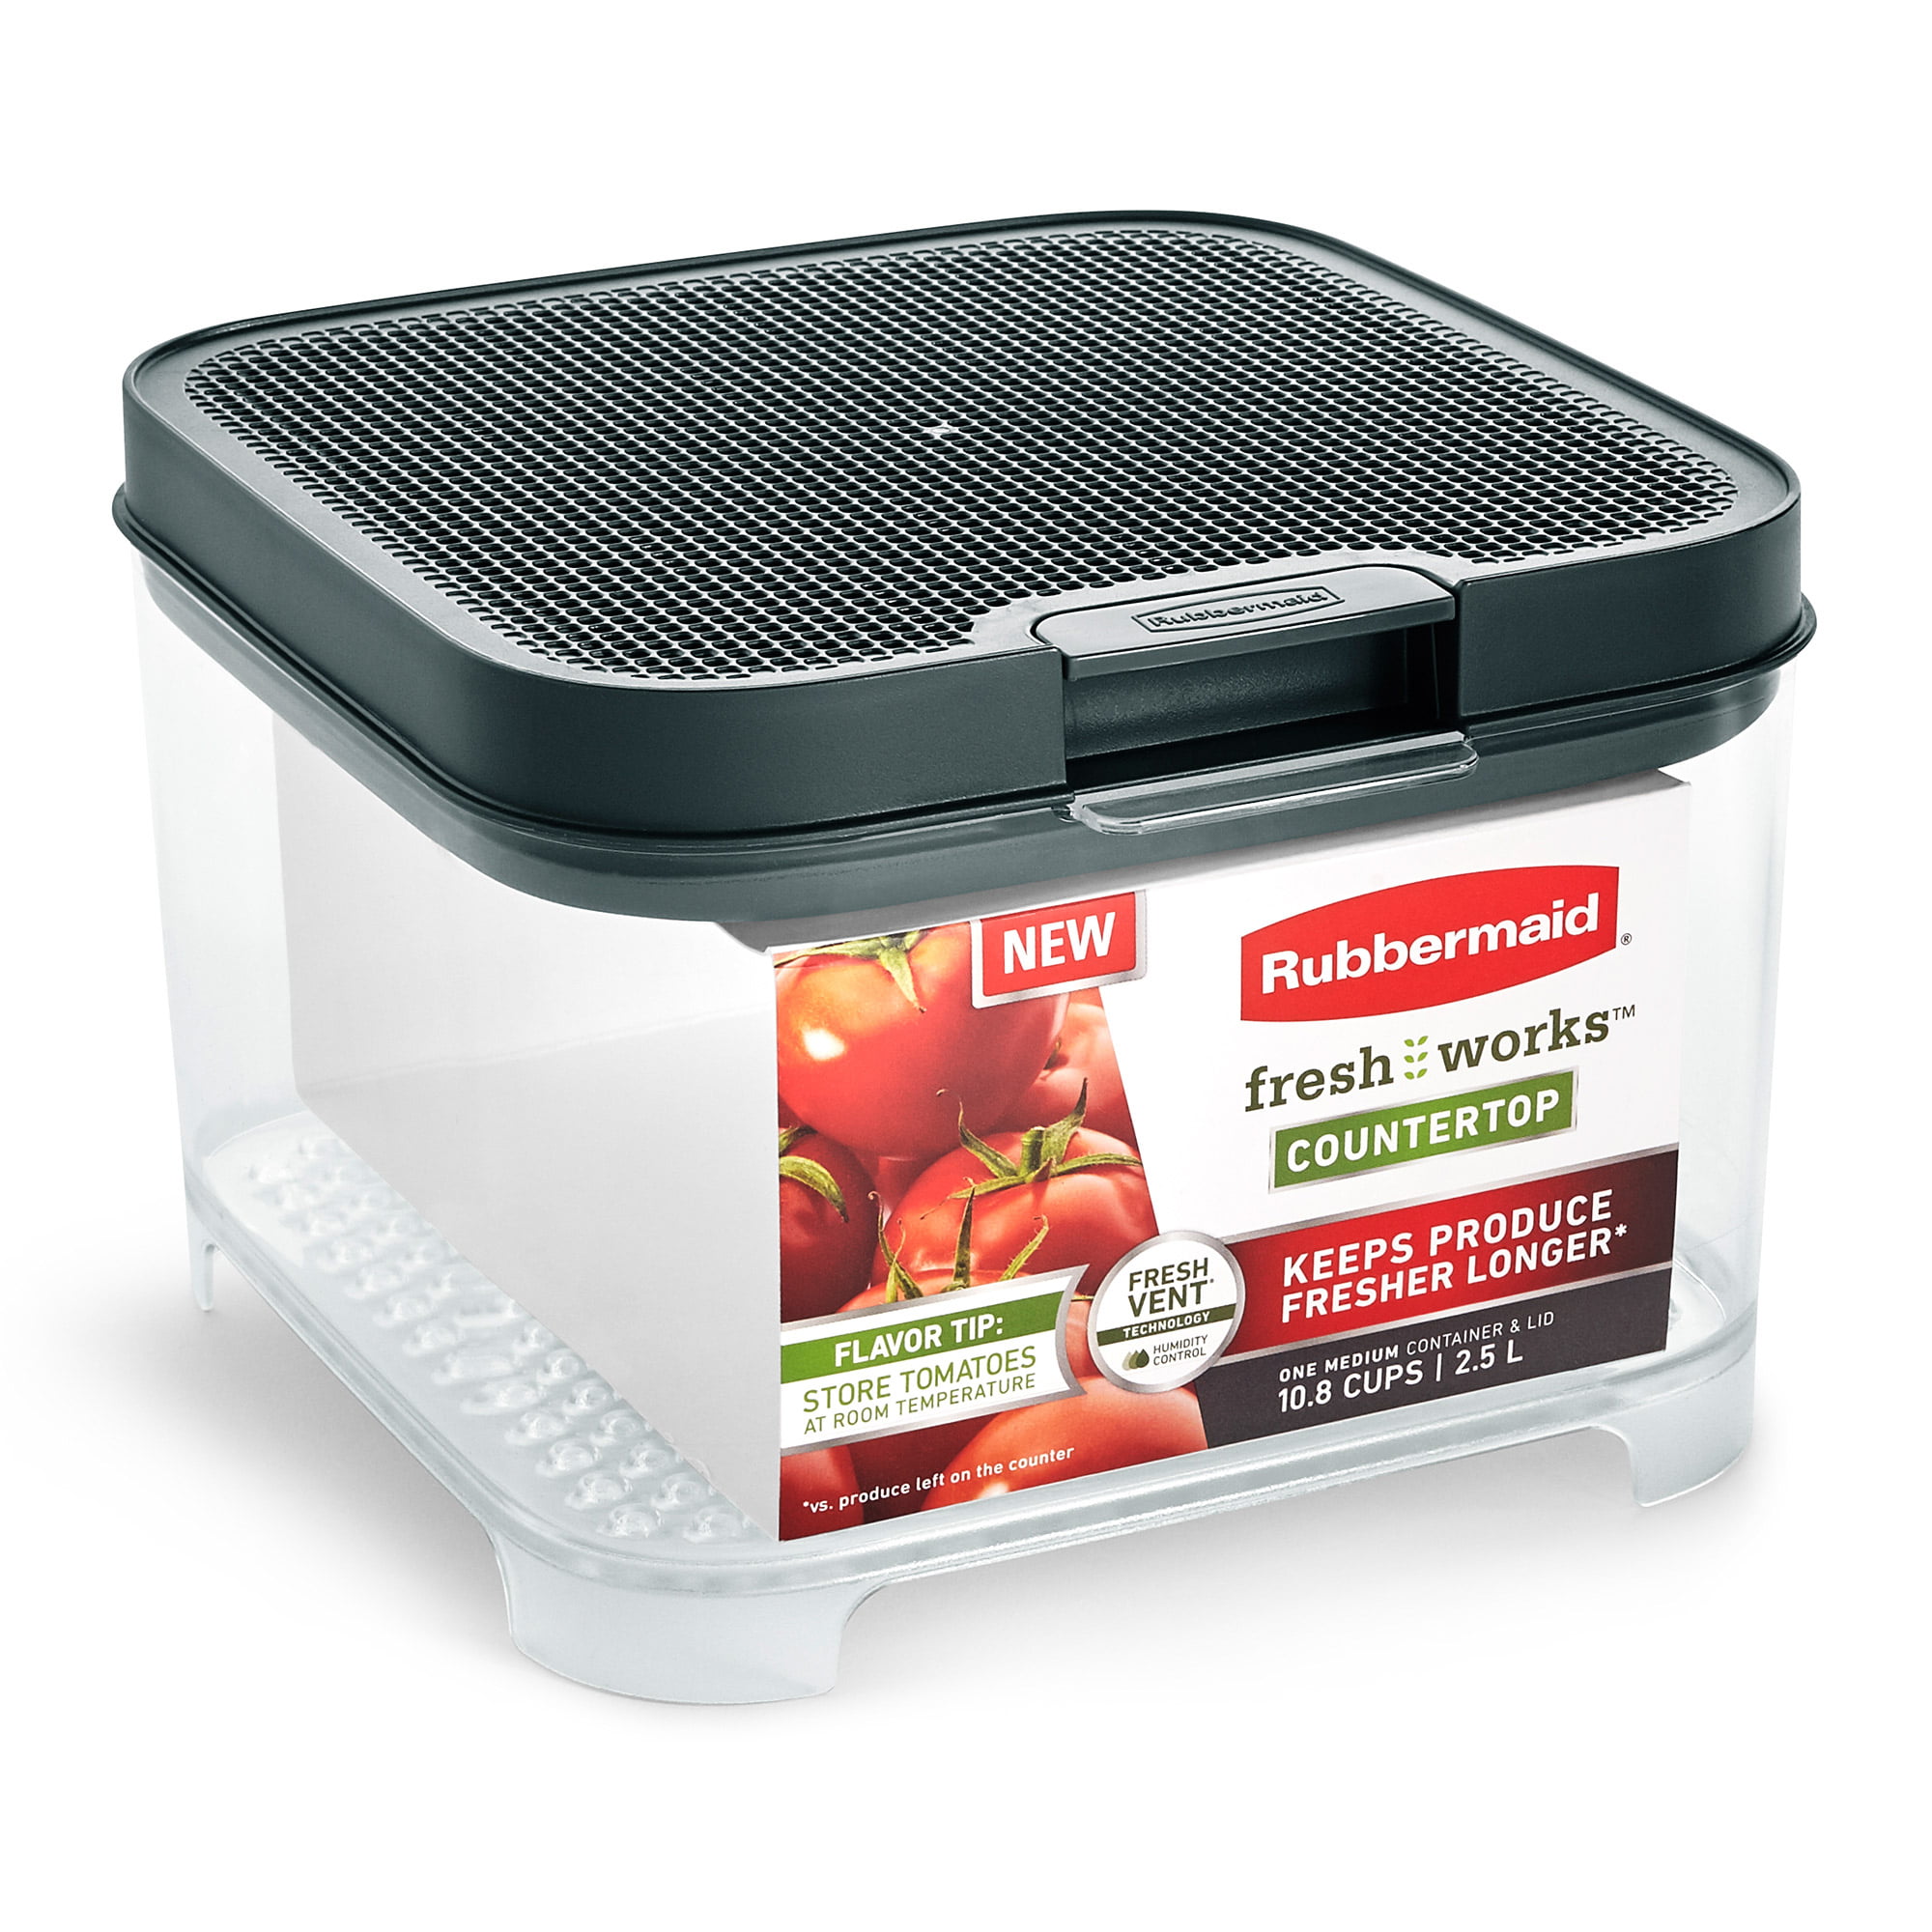 Rubbermaid Fresh Works Part 2 - AS SEEN ON TV 